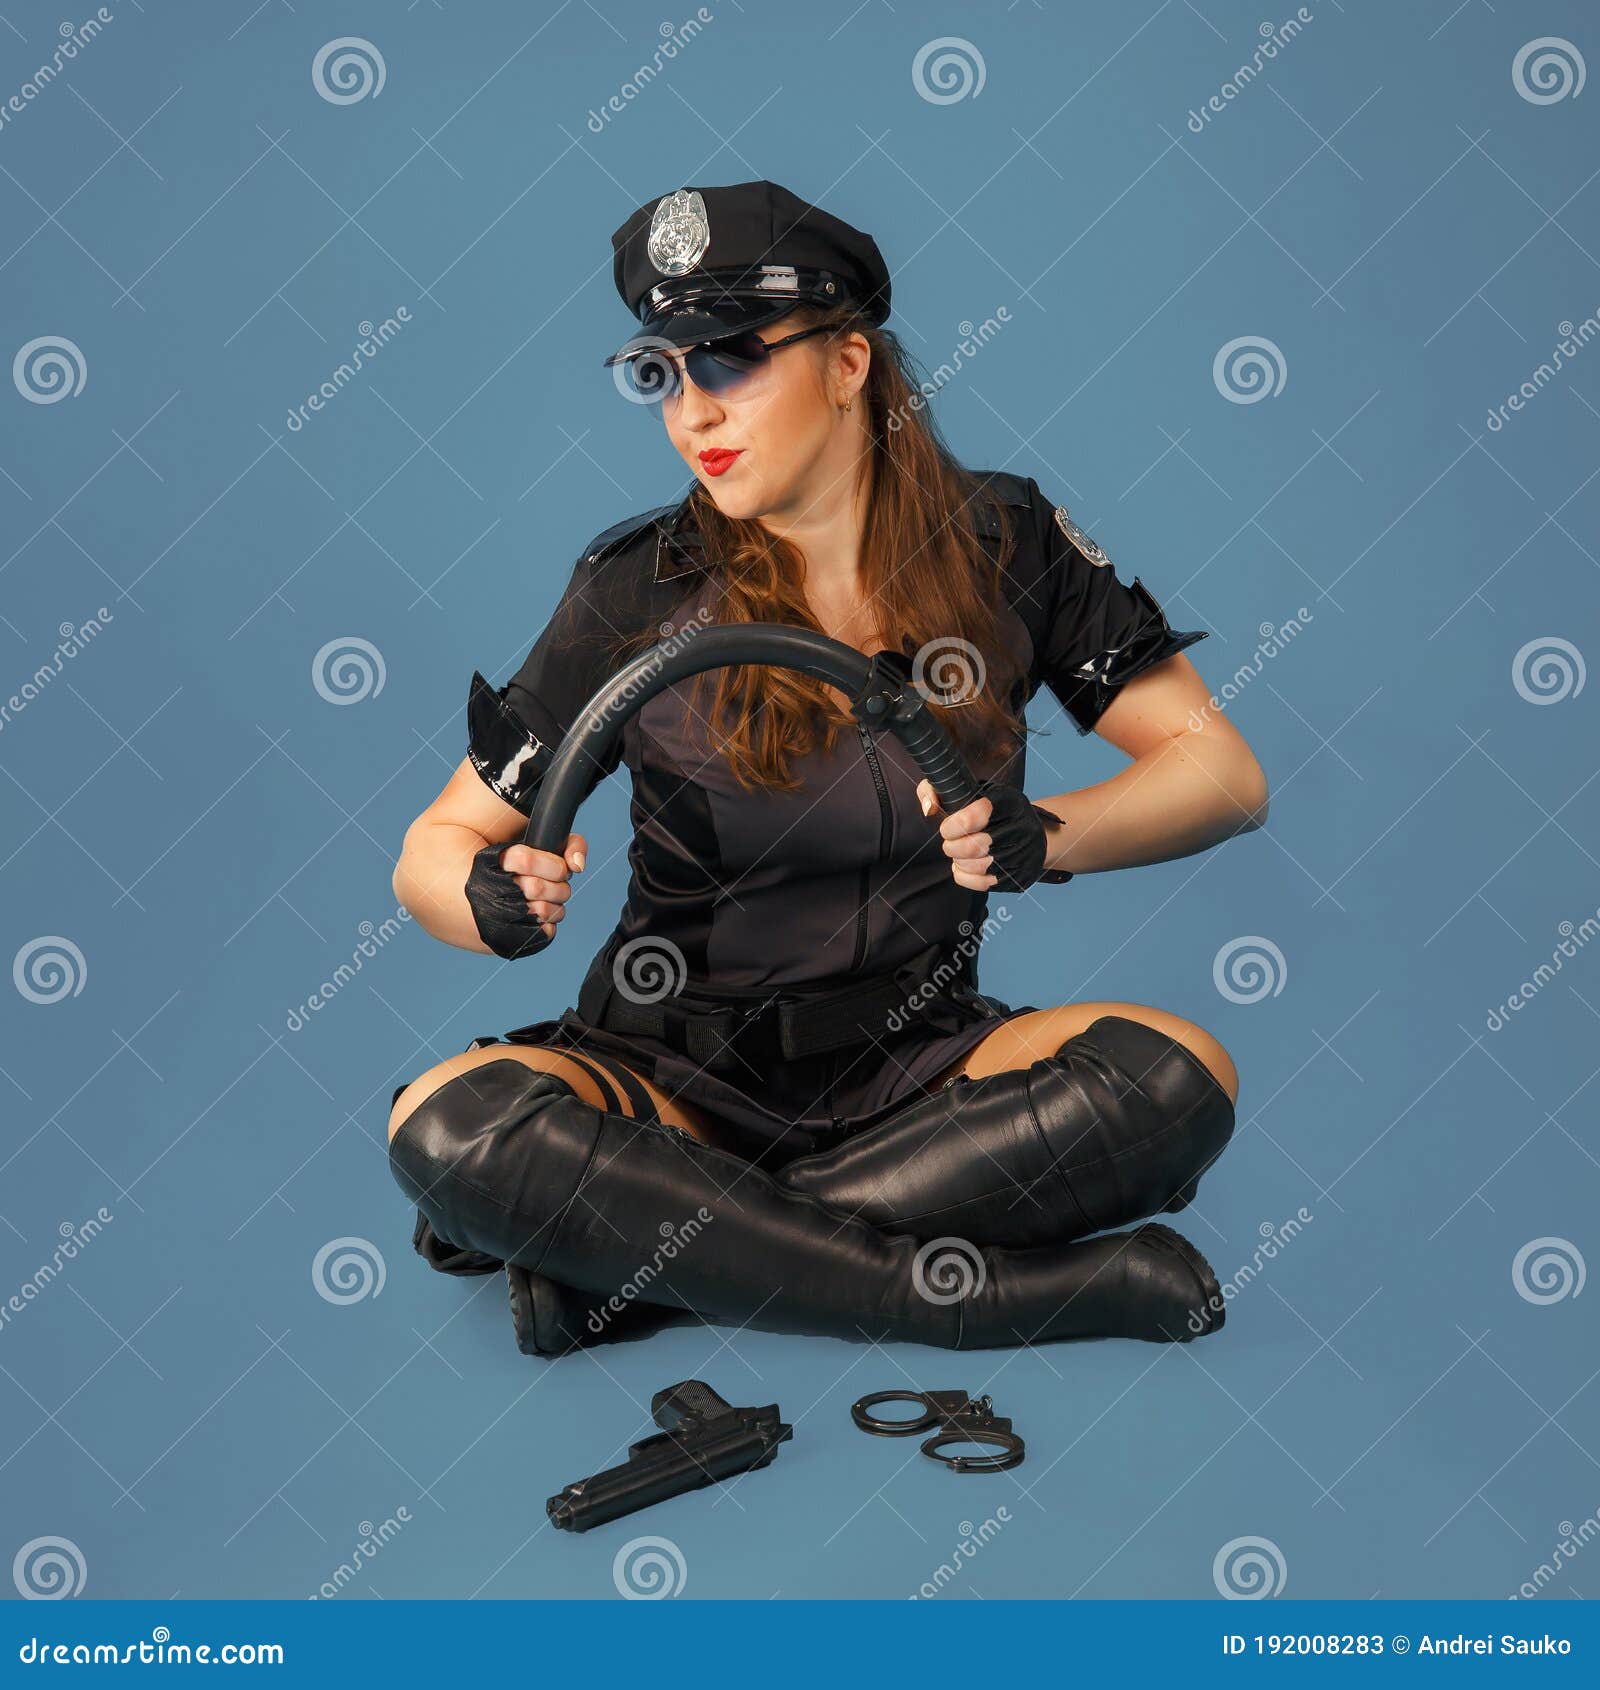 Playful Police Costume For Women